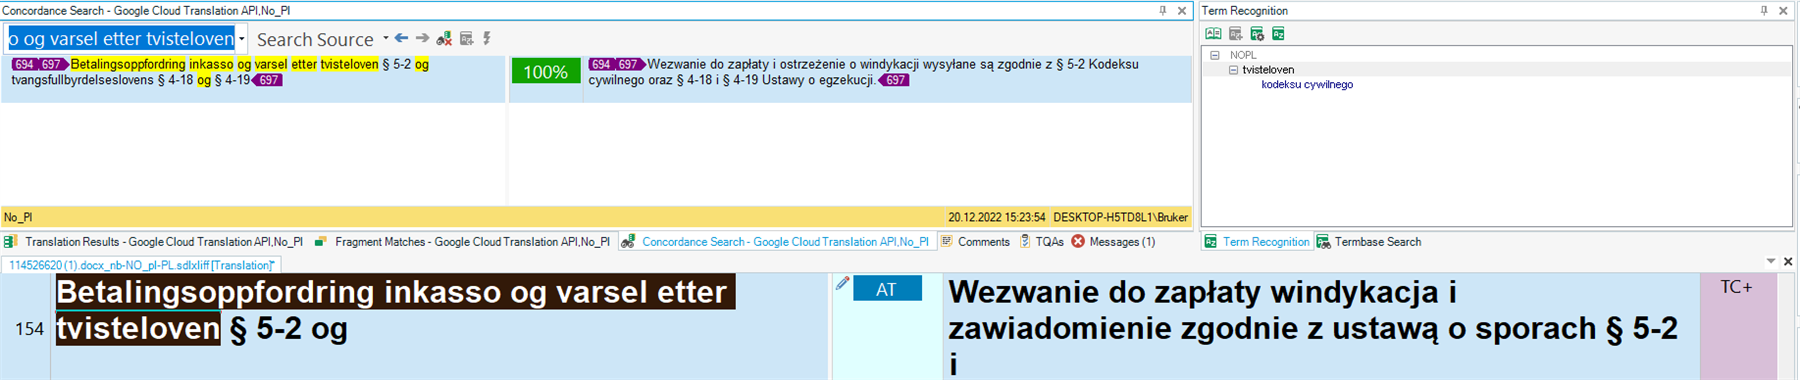 Screenshot of Trados Studio concordance search result displaying a 100% match from the translation memory for the same segment.